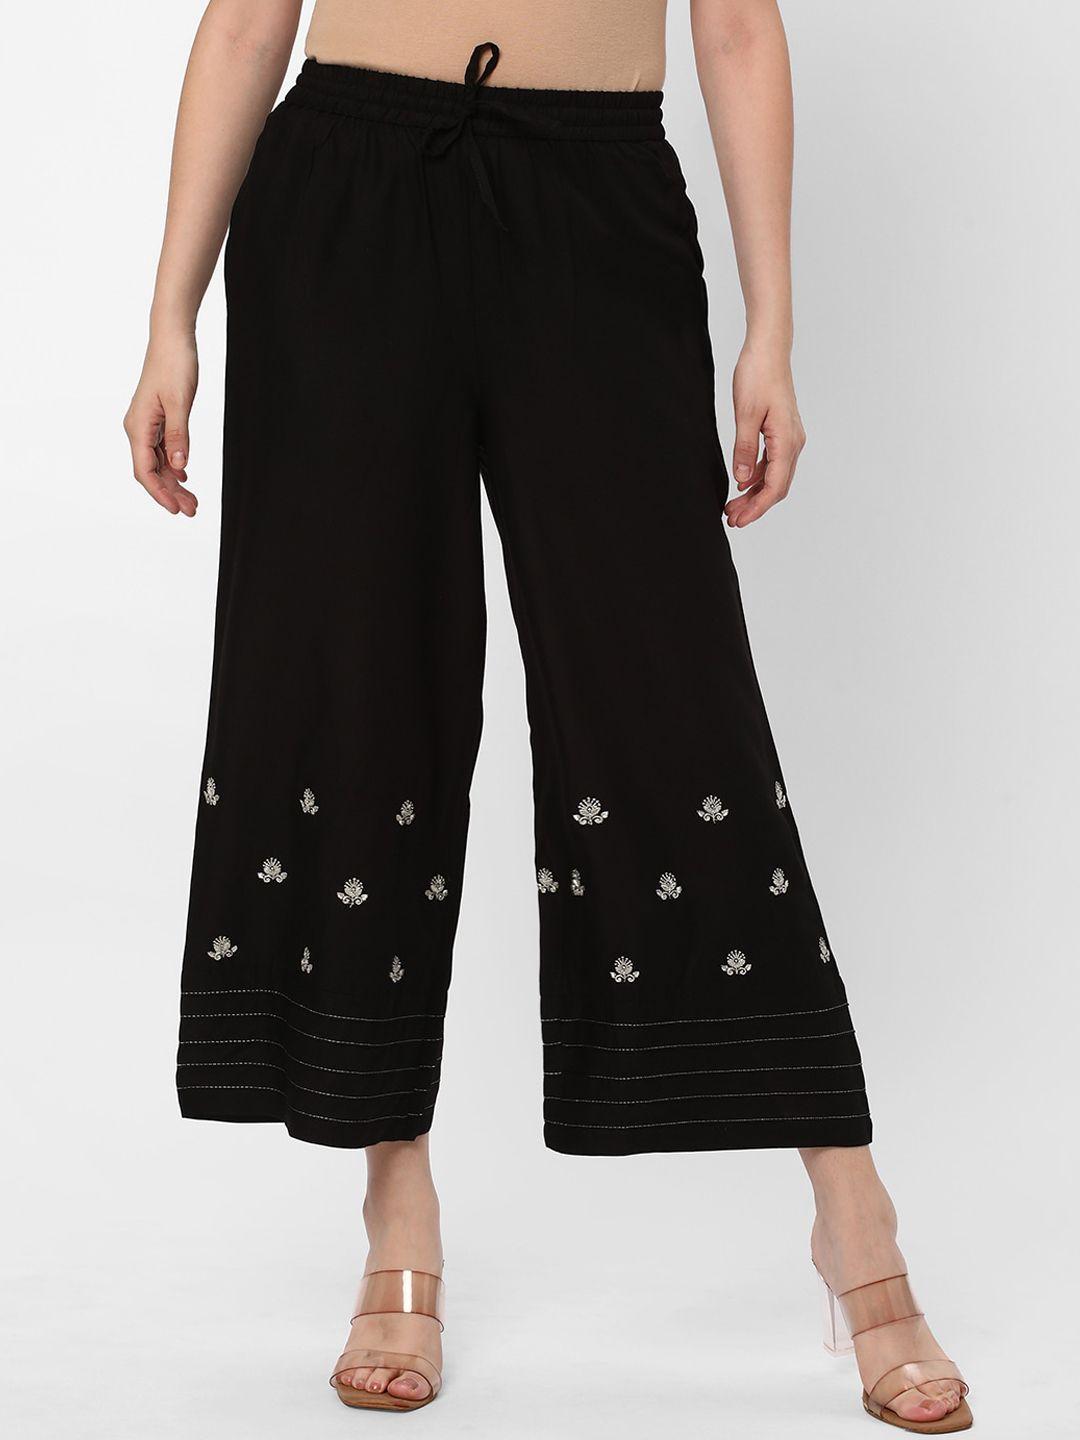 r&b women floral embroidered culottes trousers